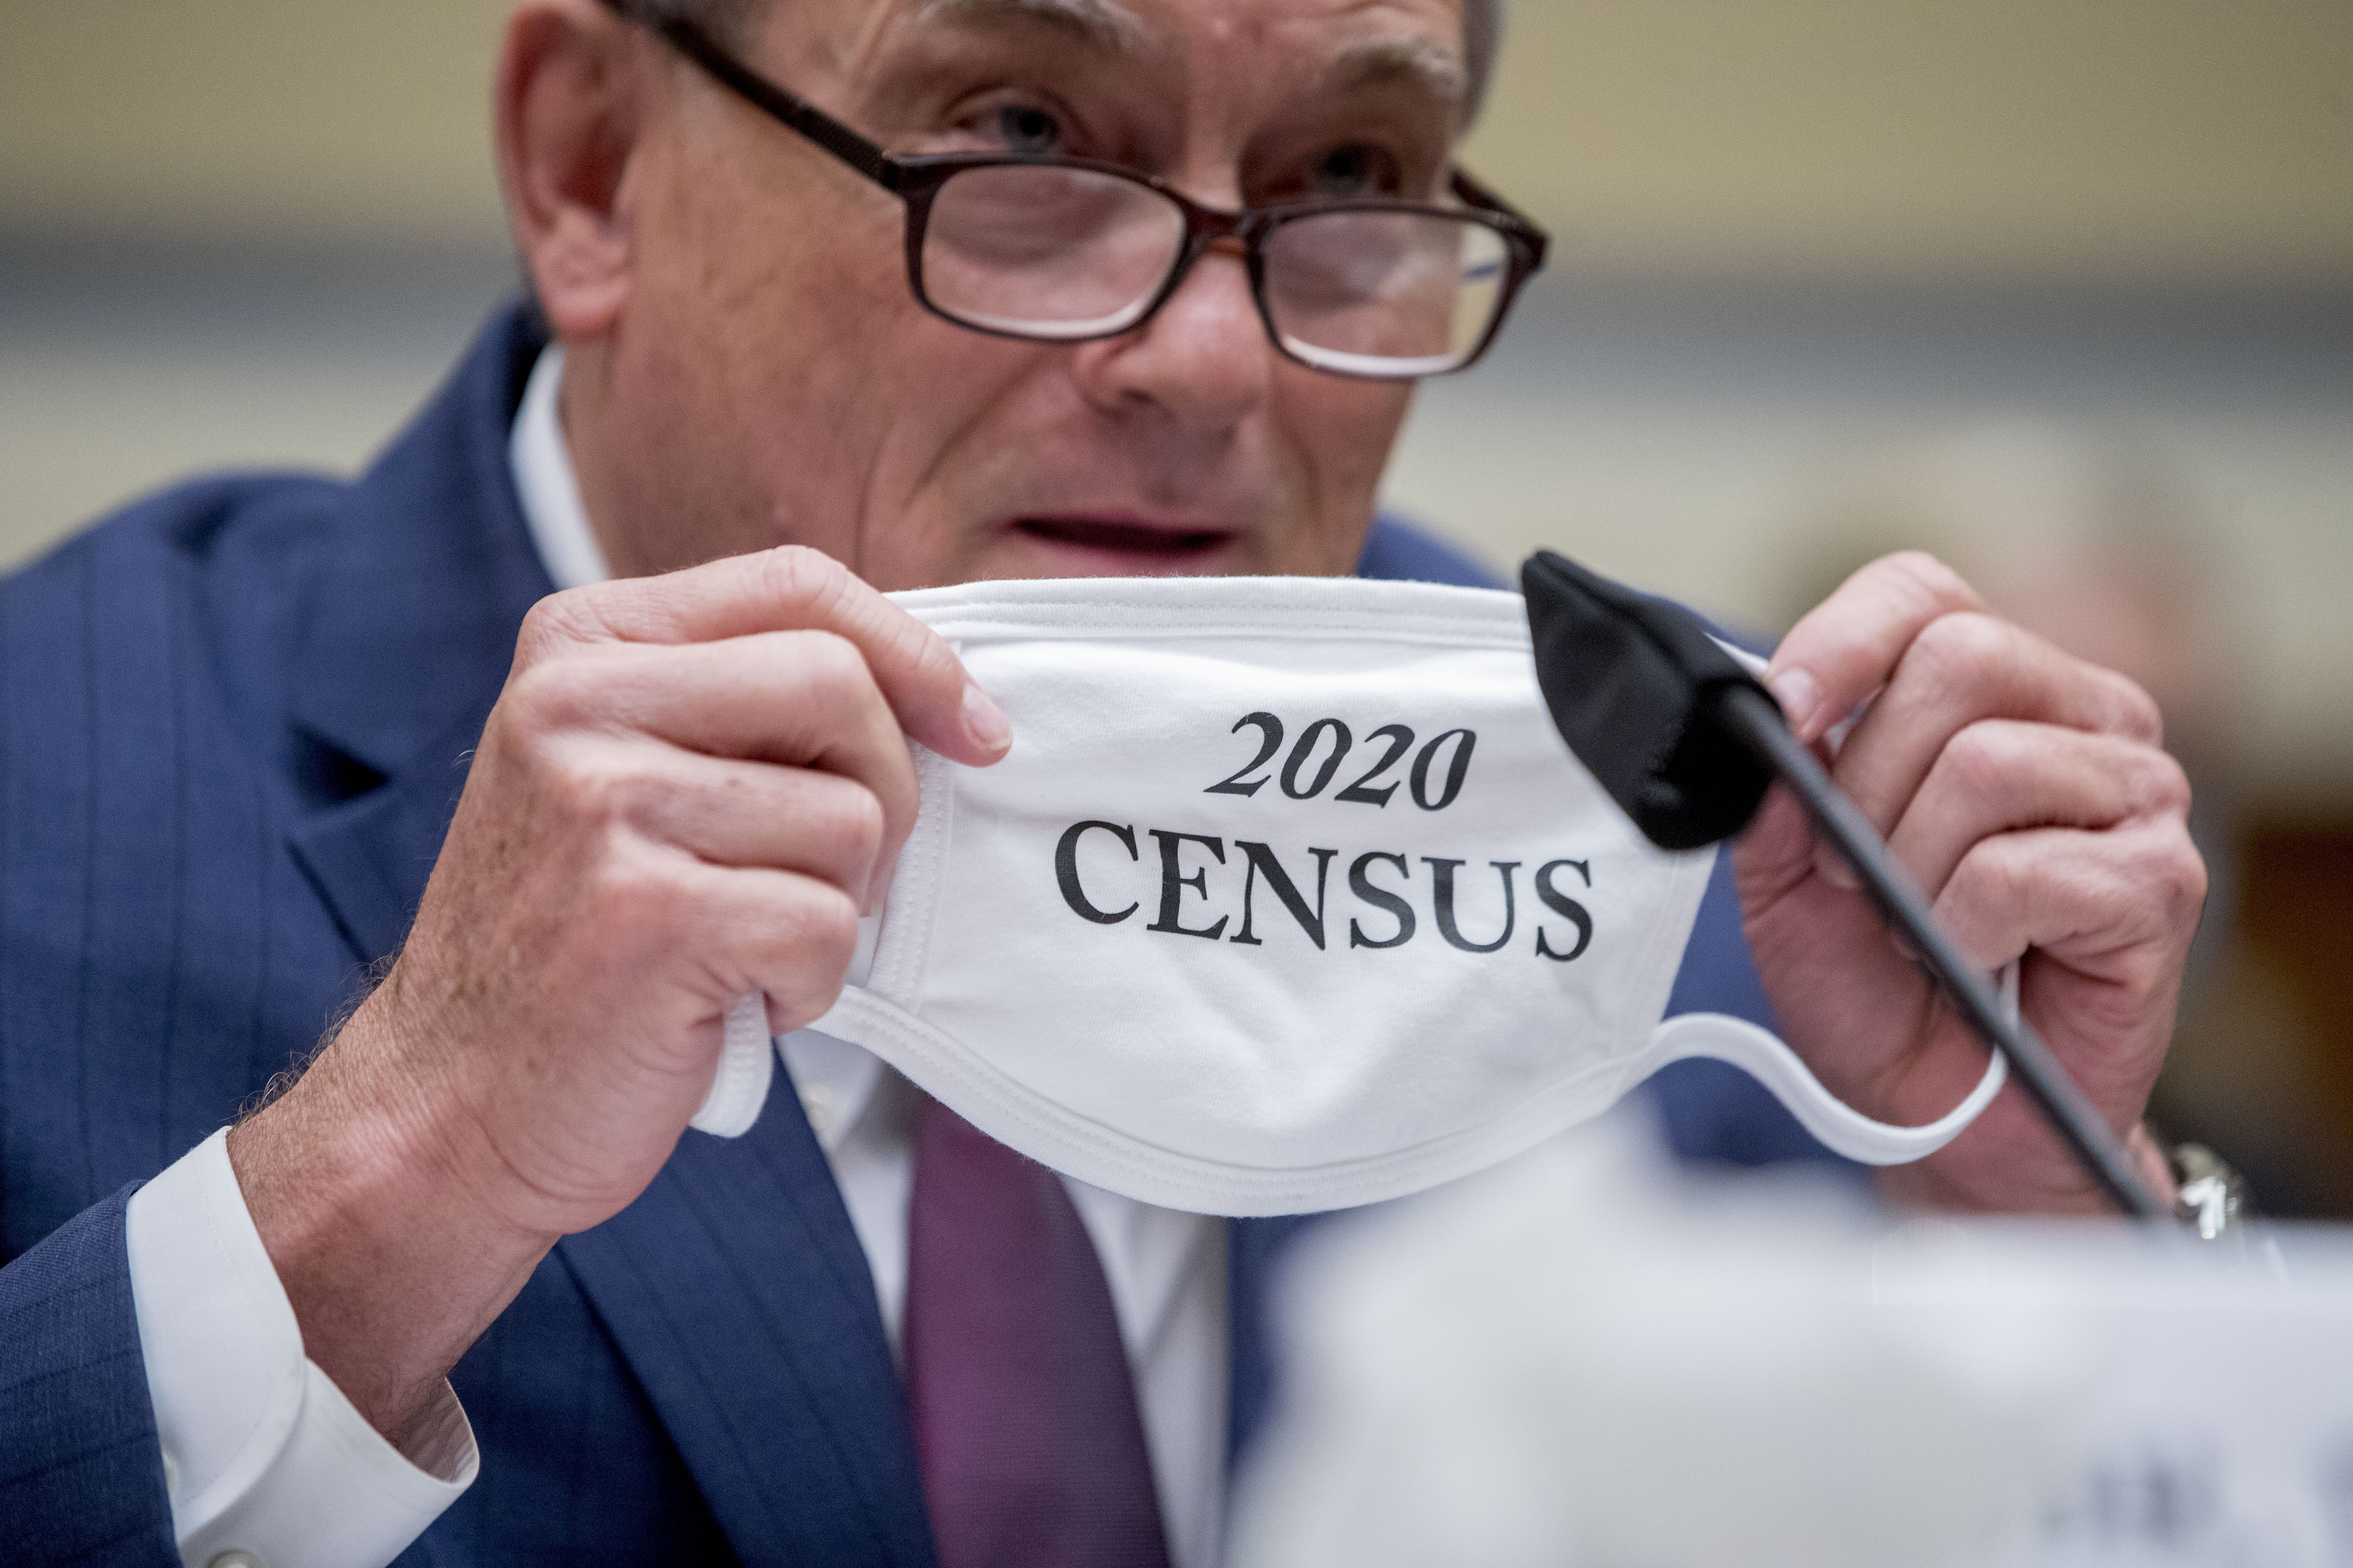 Census Bureau Director Steven Dillingham holds up his mask with the words "2020 Census" as he testifies before a House Committee on Oversight and Reform hearing on the census in July. CREDIT: Andrew Harnik/AP